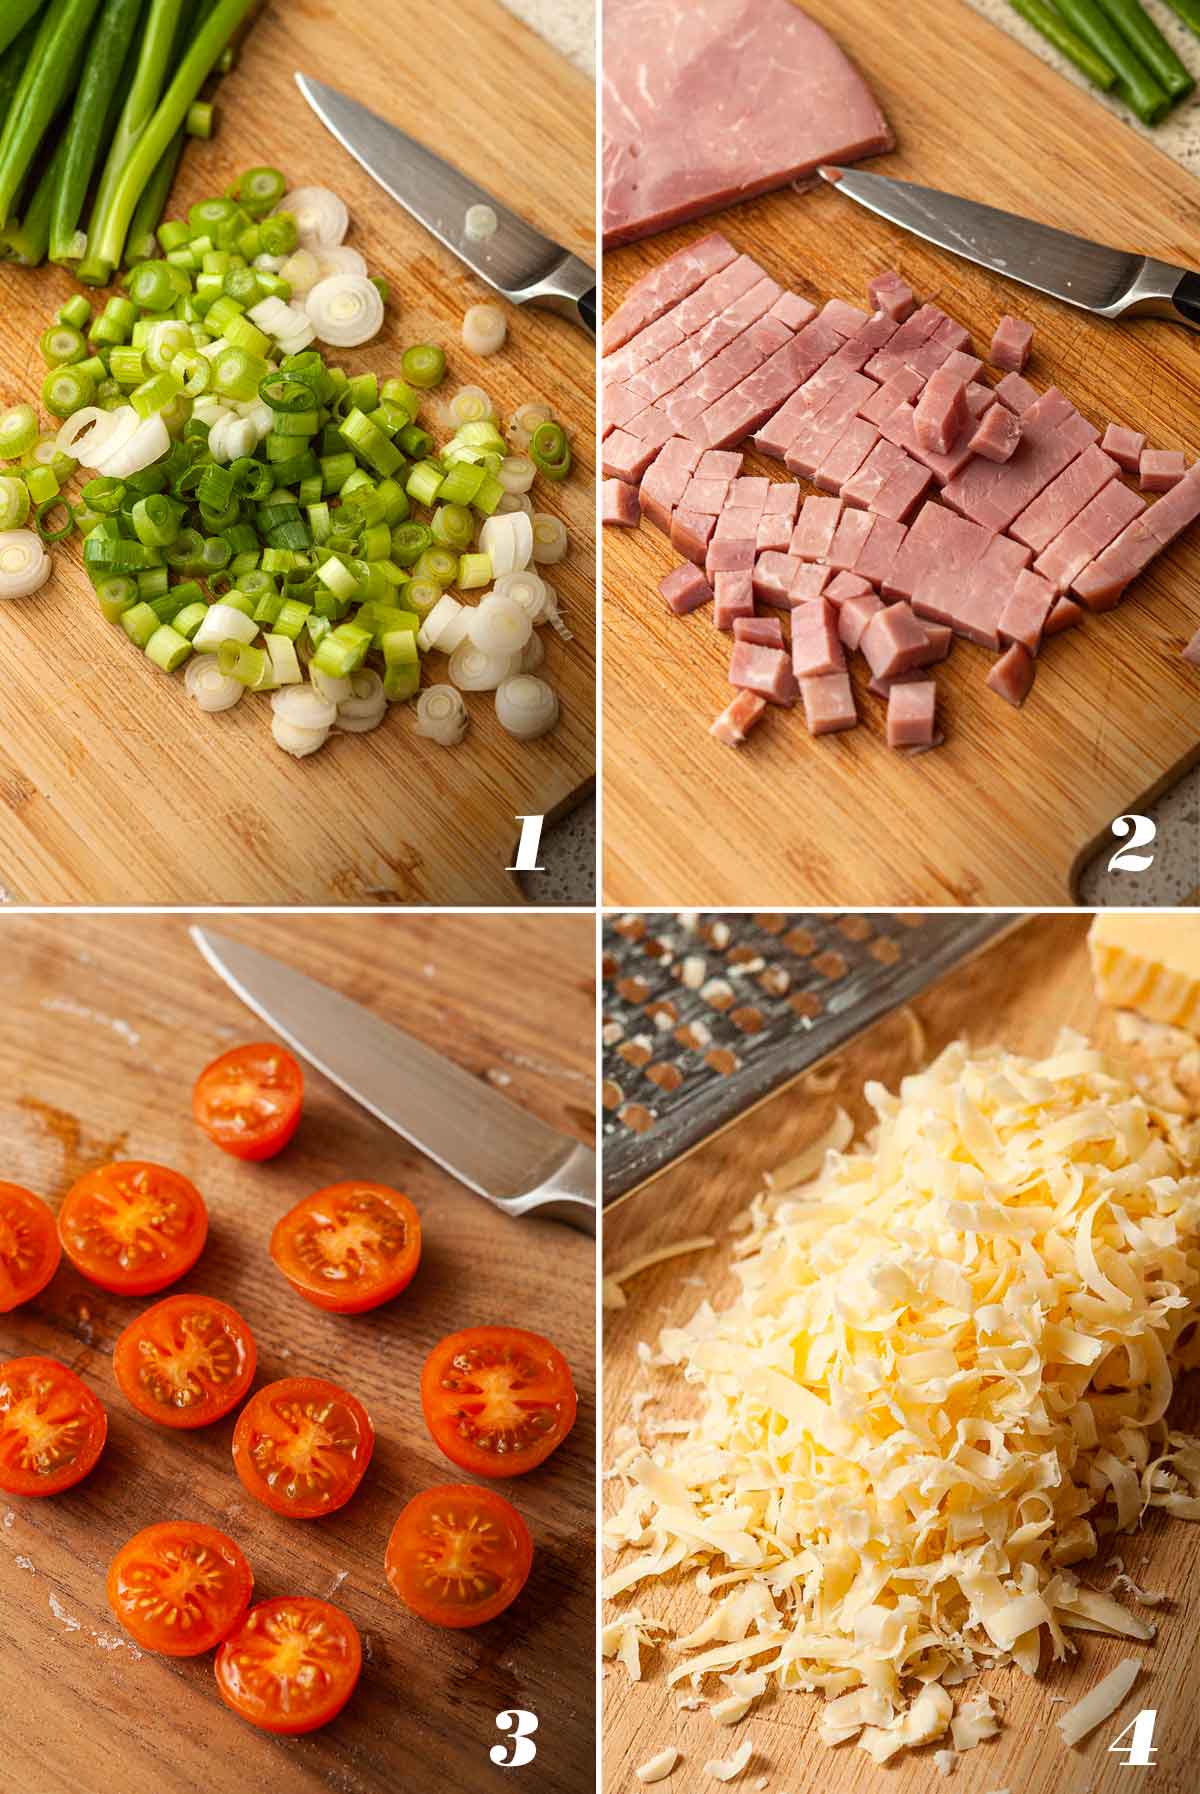 A collage of 4 numbered images showing how to prepare ingredients for mini-quiche.